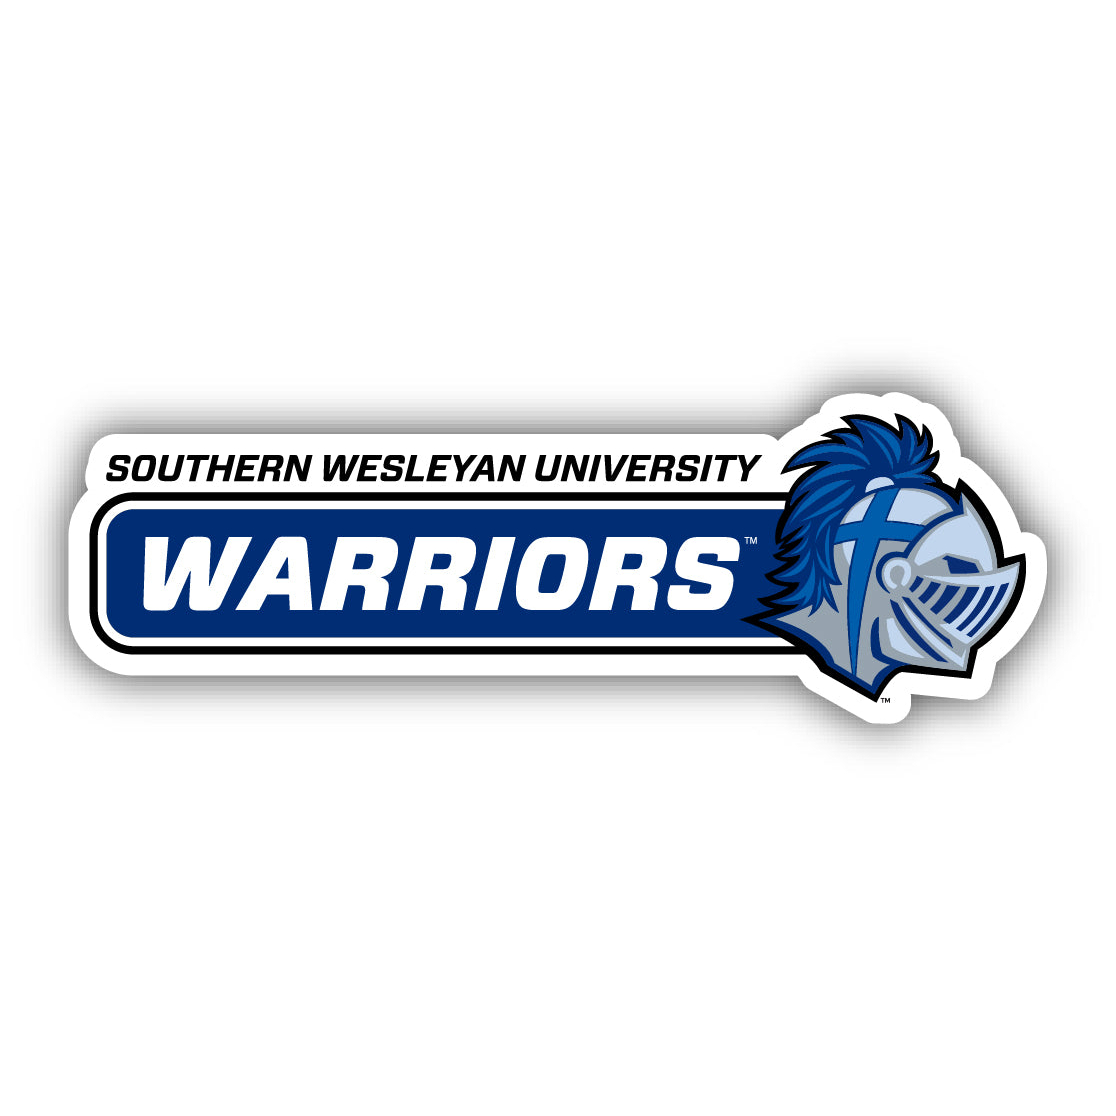 Southern Wesleyan University 4 Inch Wide Colorful Vinyl Decal Sticker